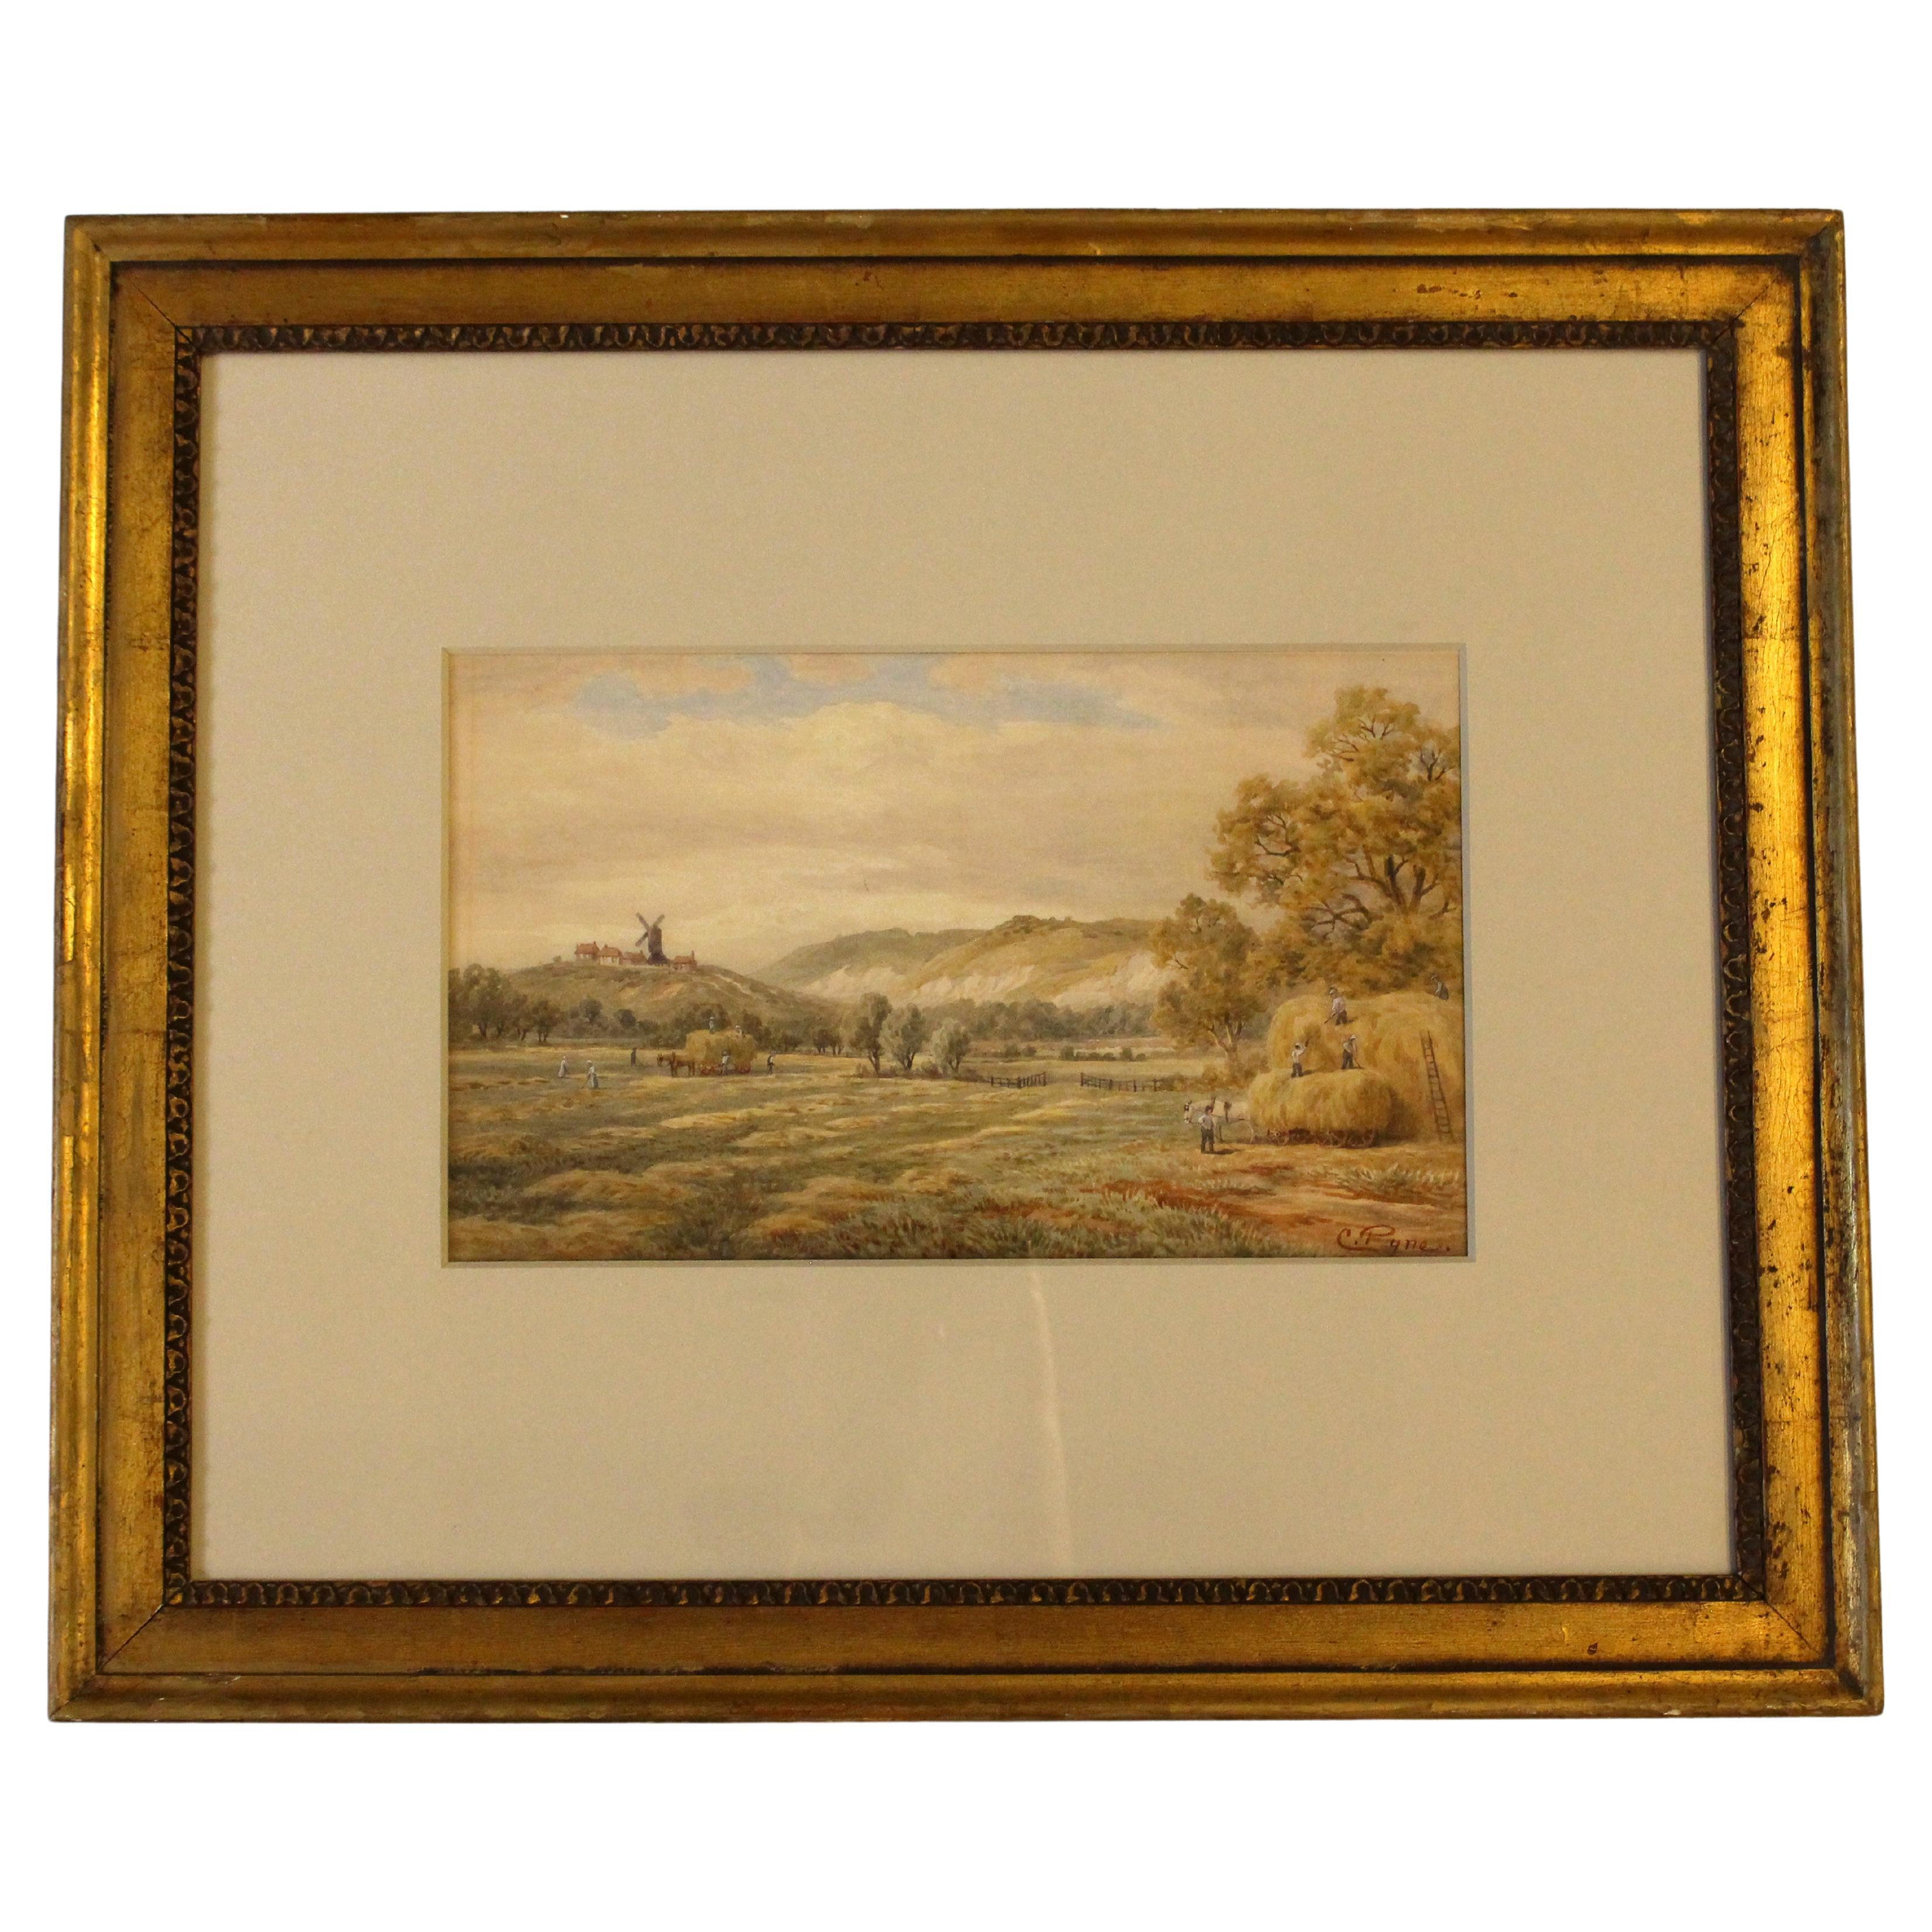 Mid-19th Century English Watercolor "Haying With Village and Windmill" by Charle